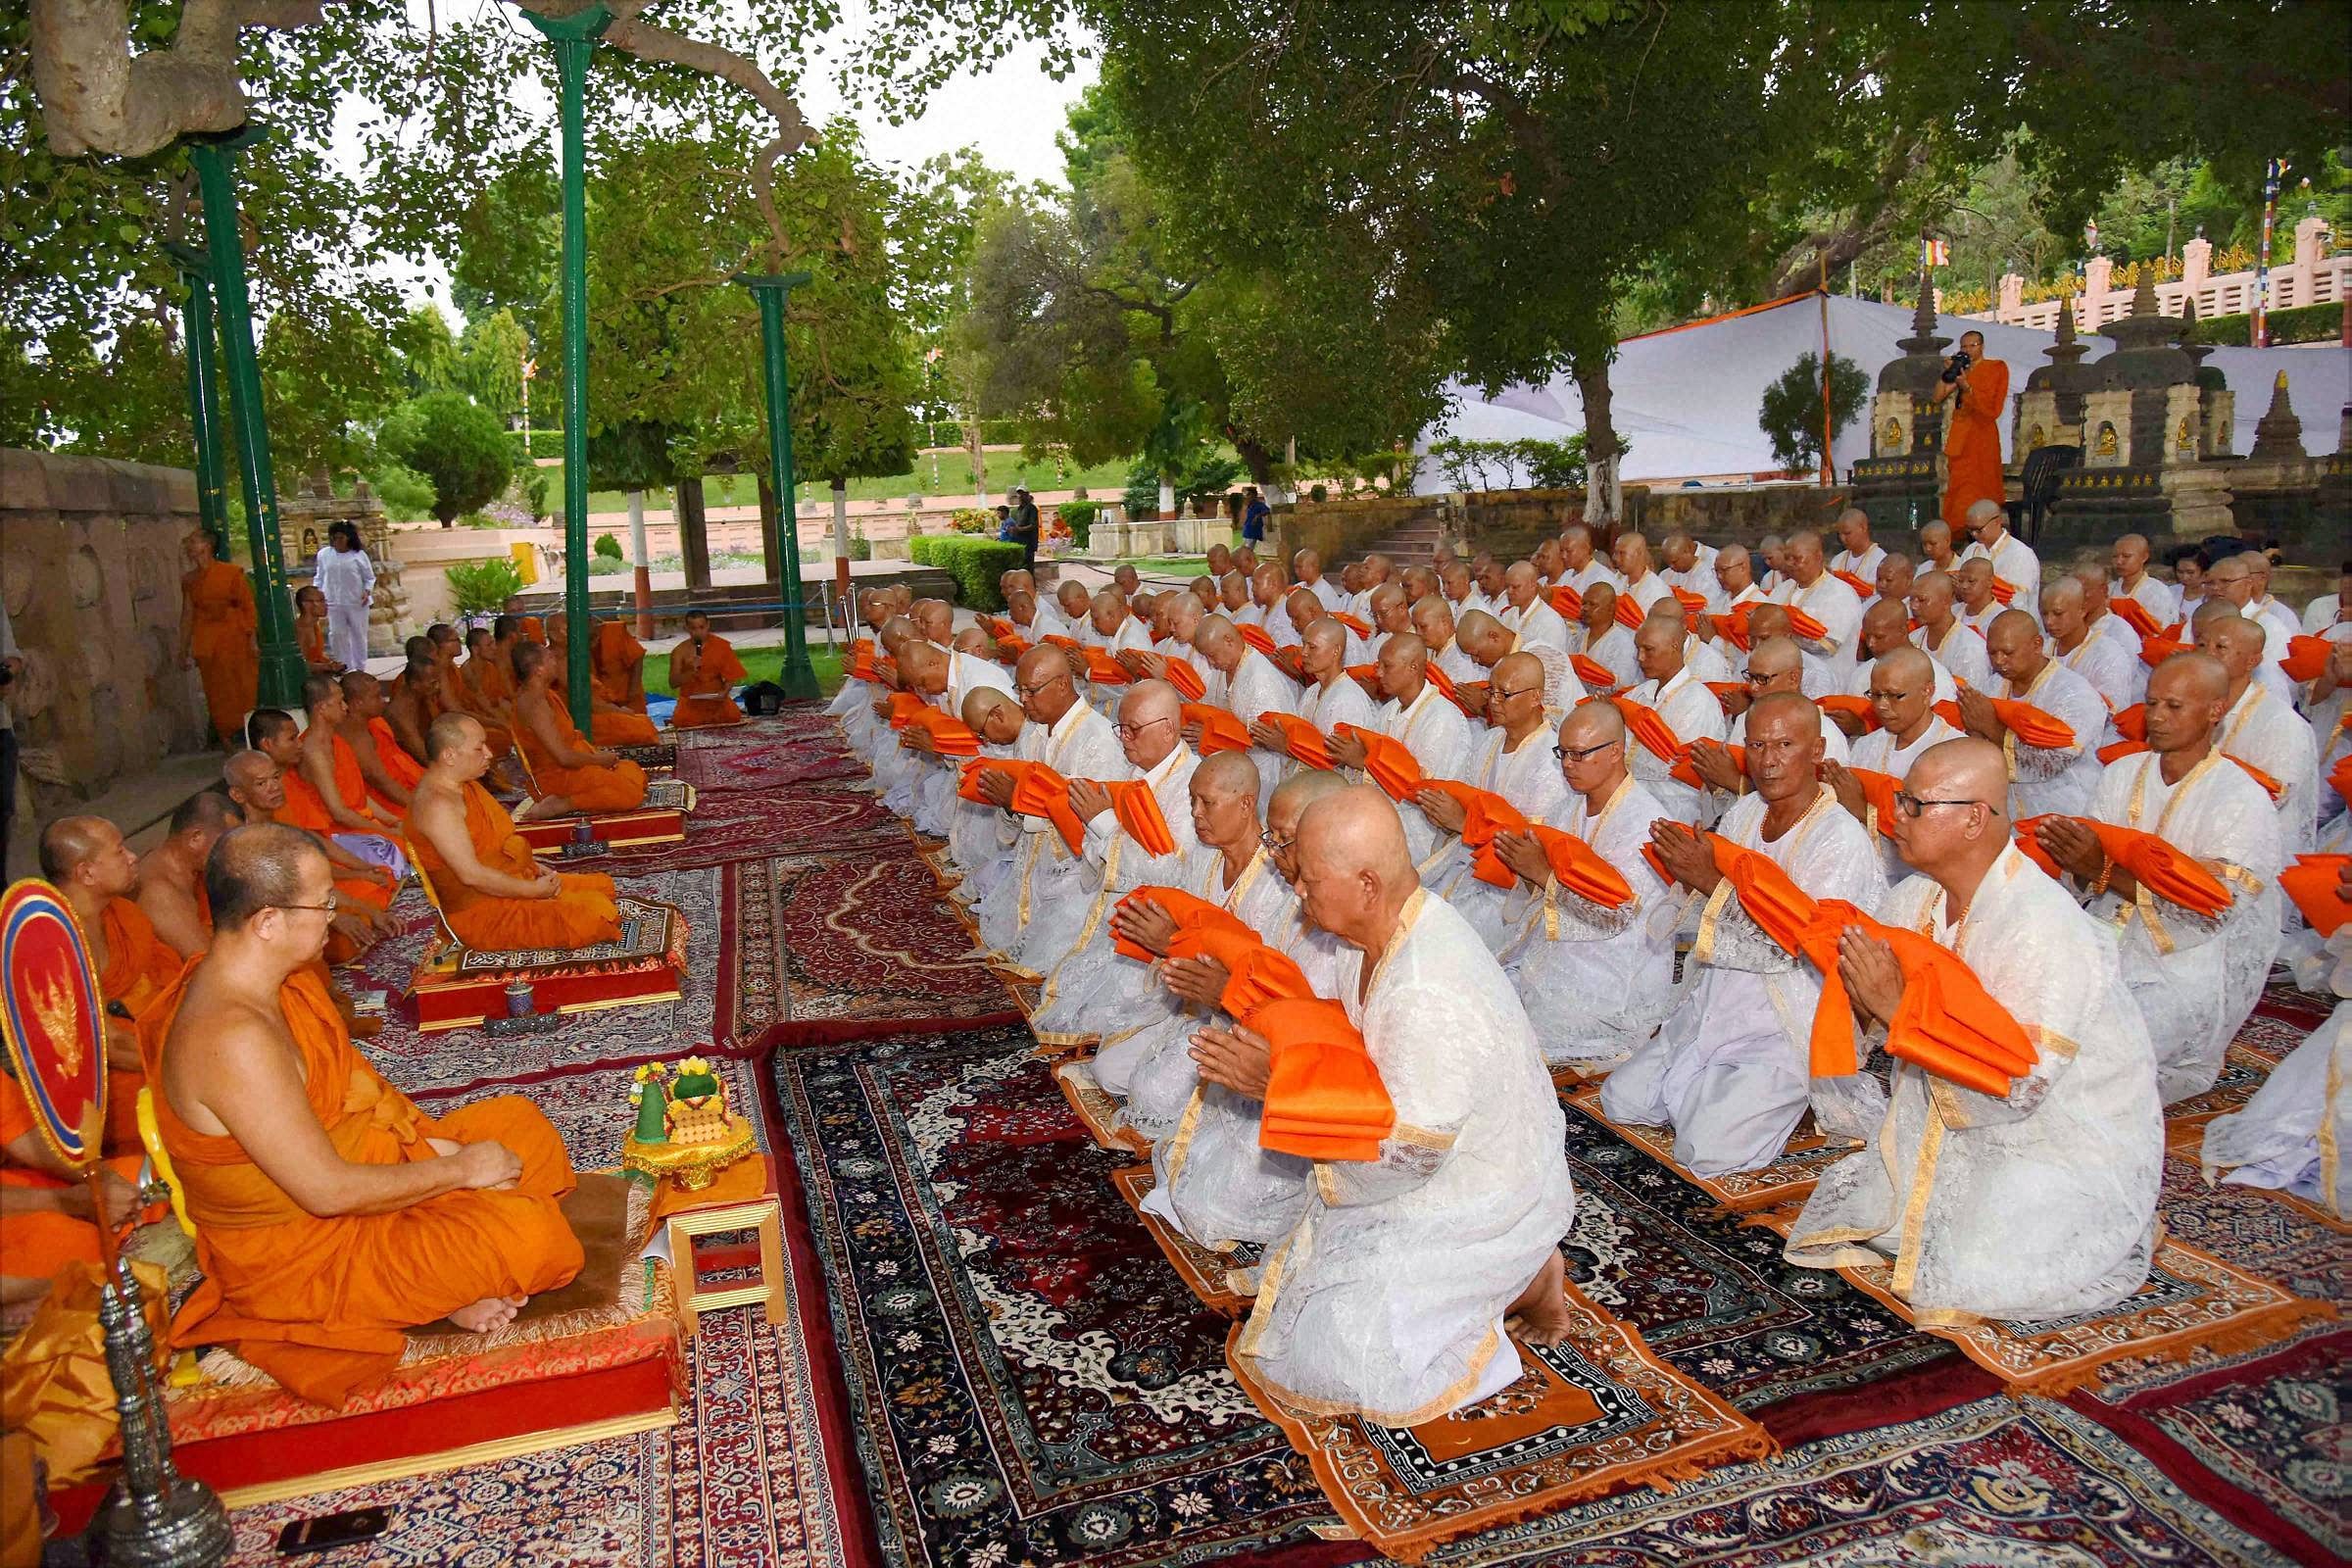 With an aim to promote prominent Buddhist heritage and pilgrimage sites in Maharashtra, the Maharashtra Tourism Development Corporation in association with the Ministry of Tourism is organizing the “6th International Buddhist Conclave 2018 on 24th August in Aurangabad. PTI file photo